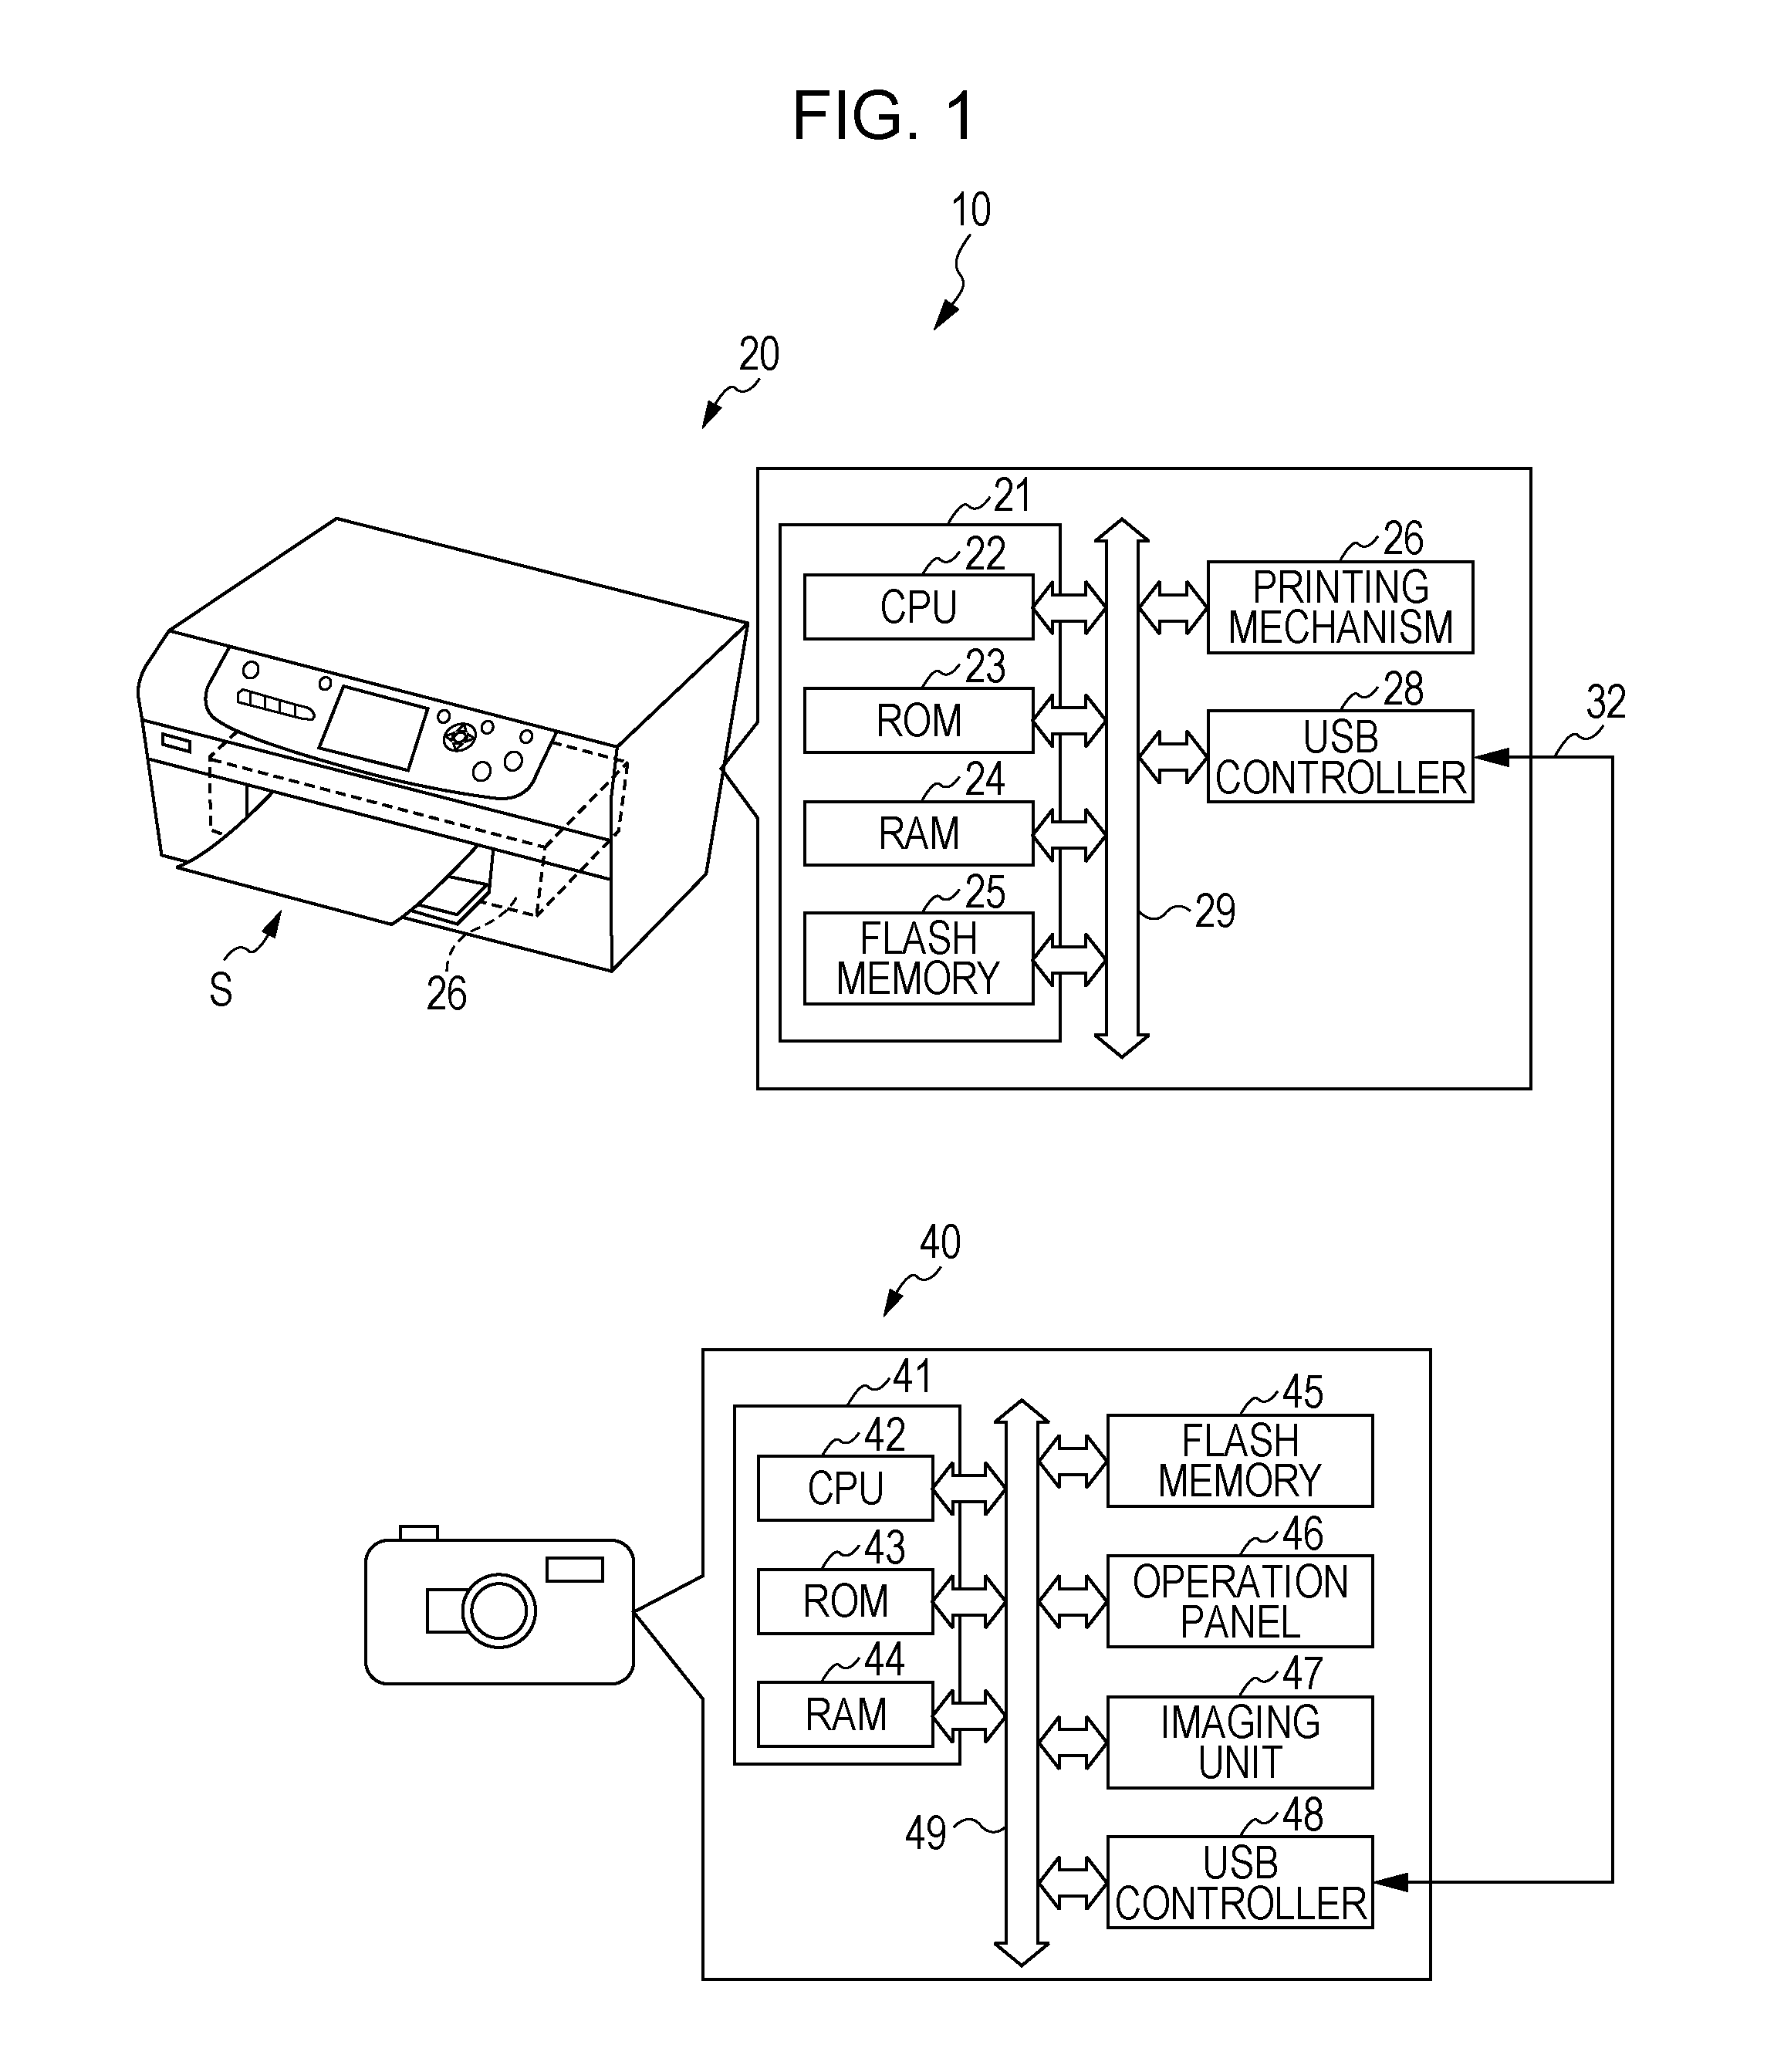 Print instruction apparatus and printing system